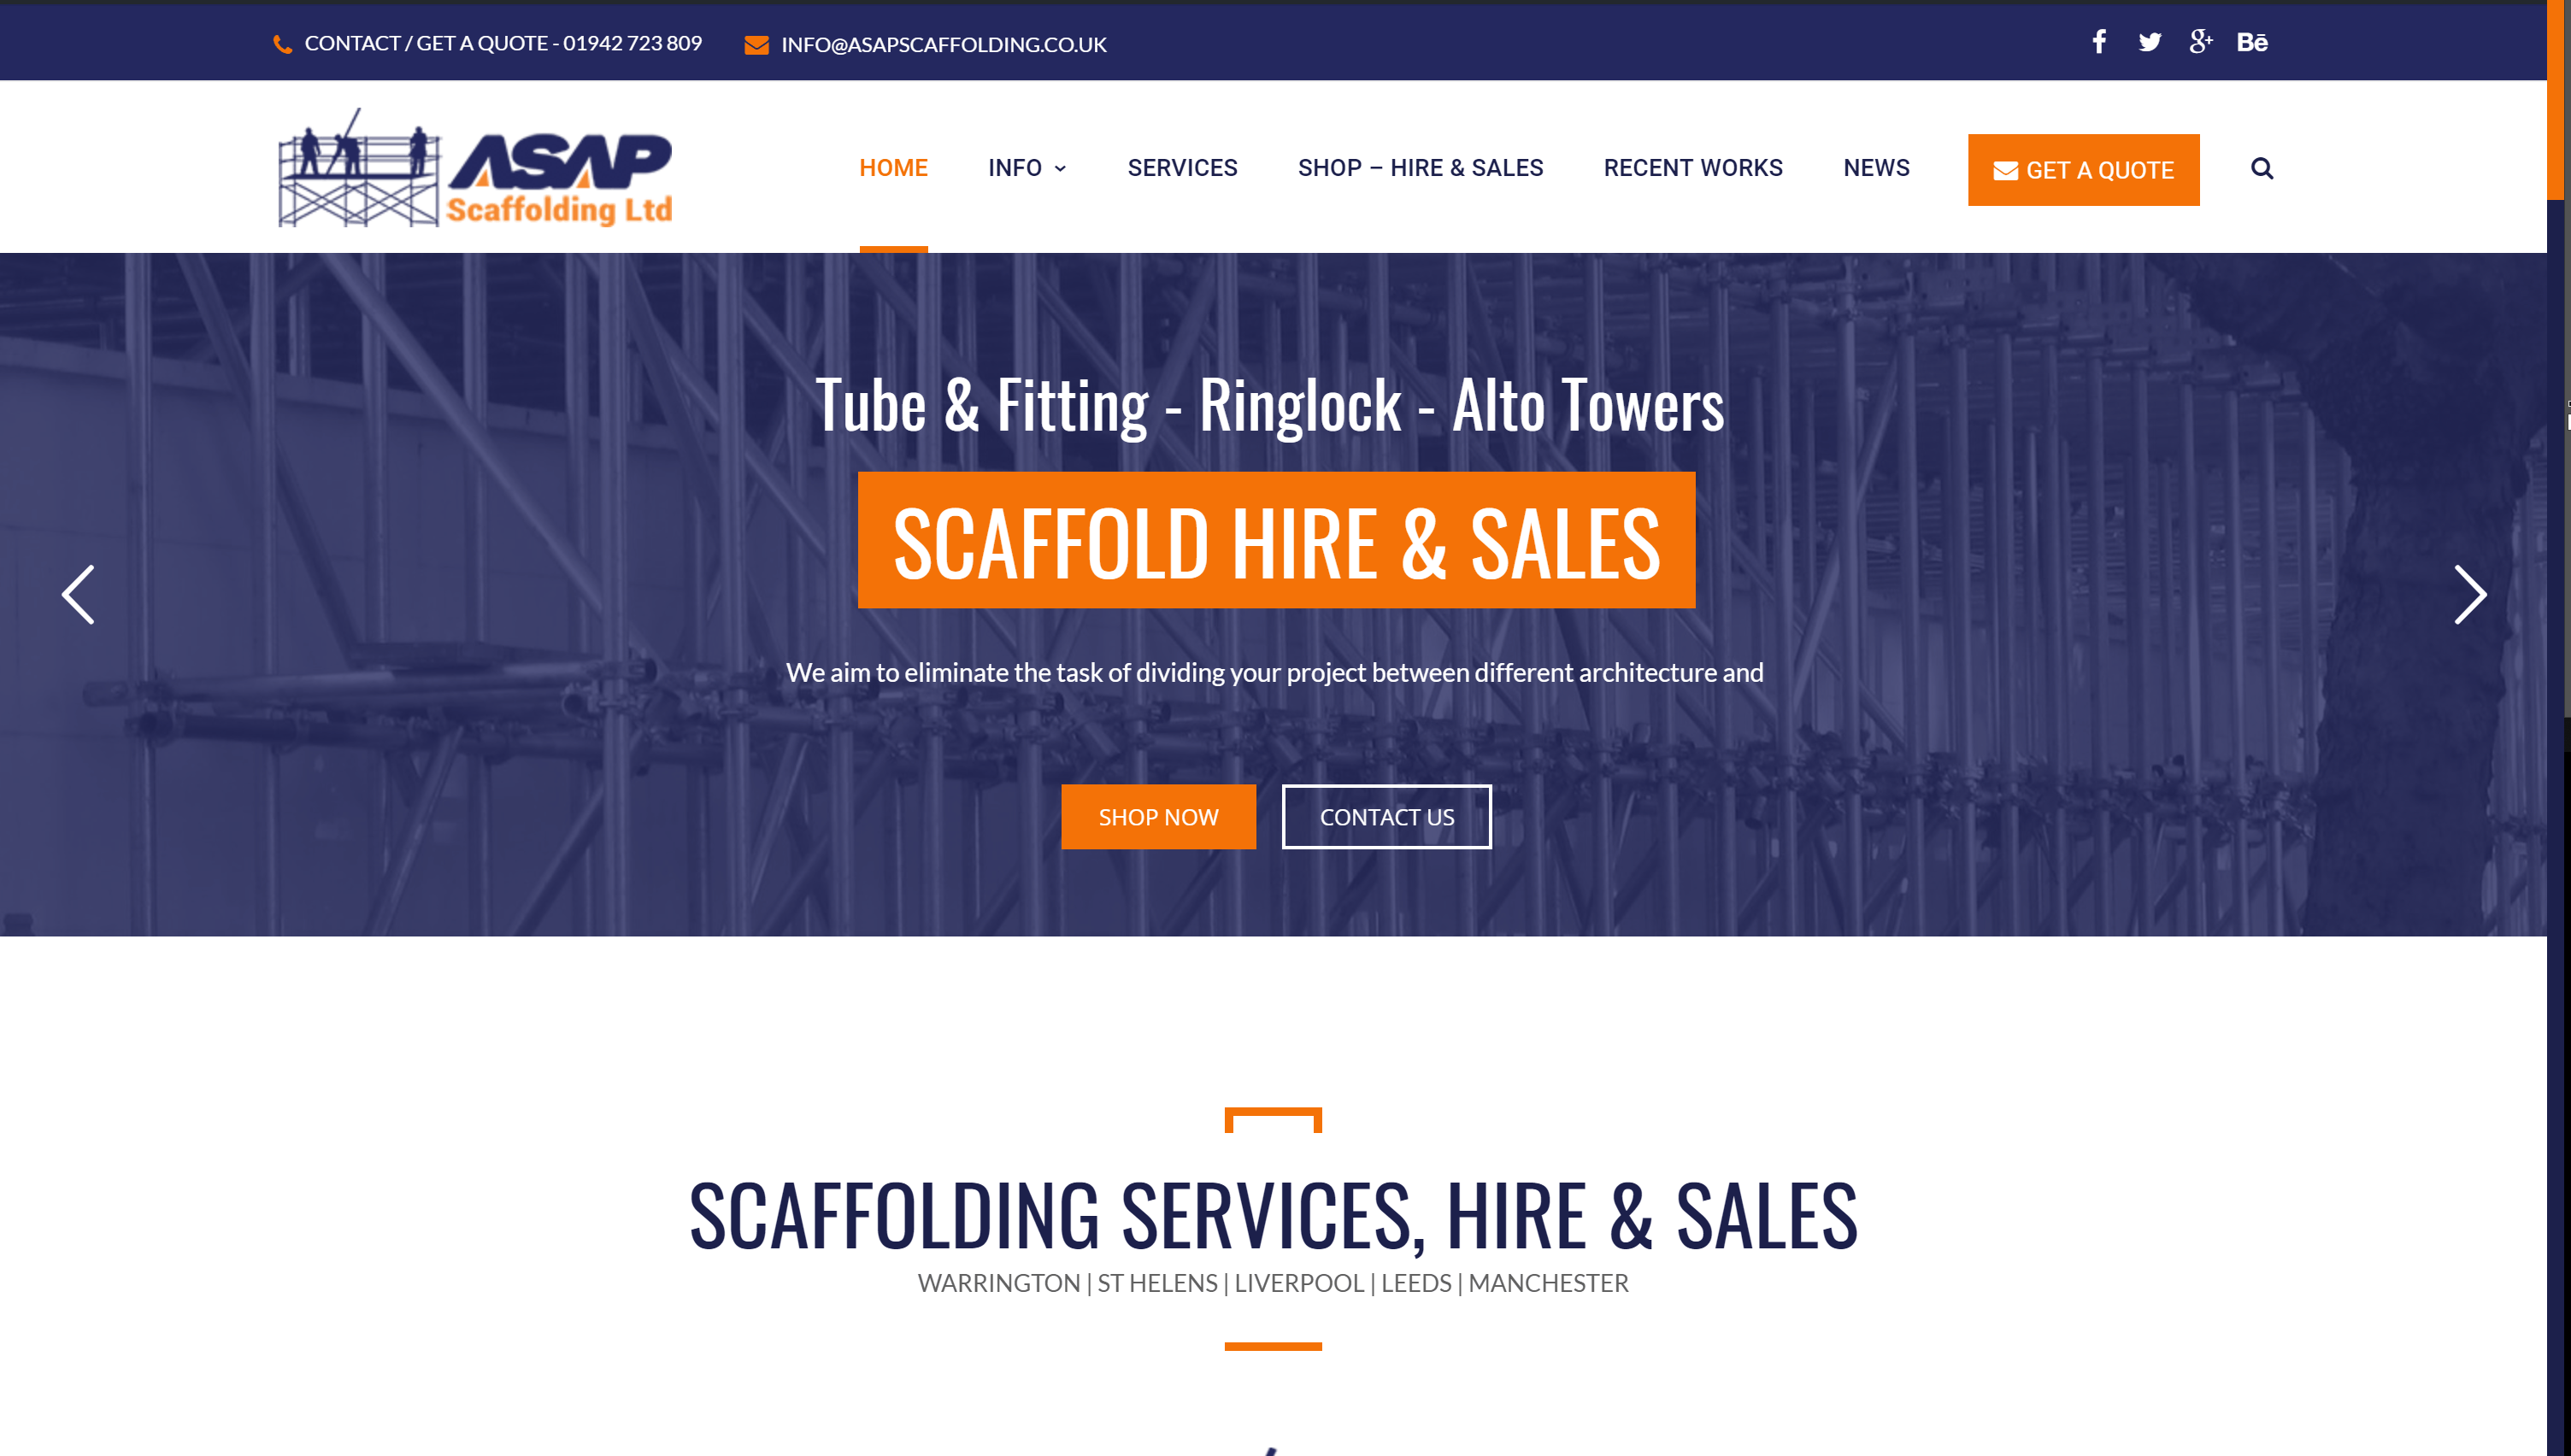 Welcome to Our New Website: ASAP Scaffolding Ltd